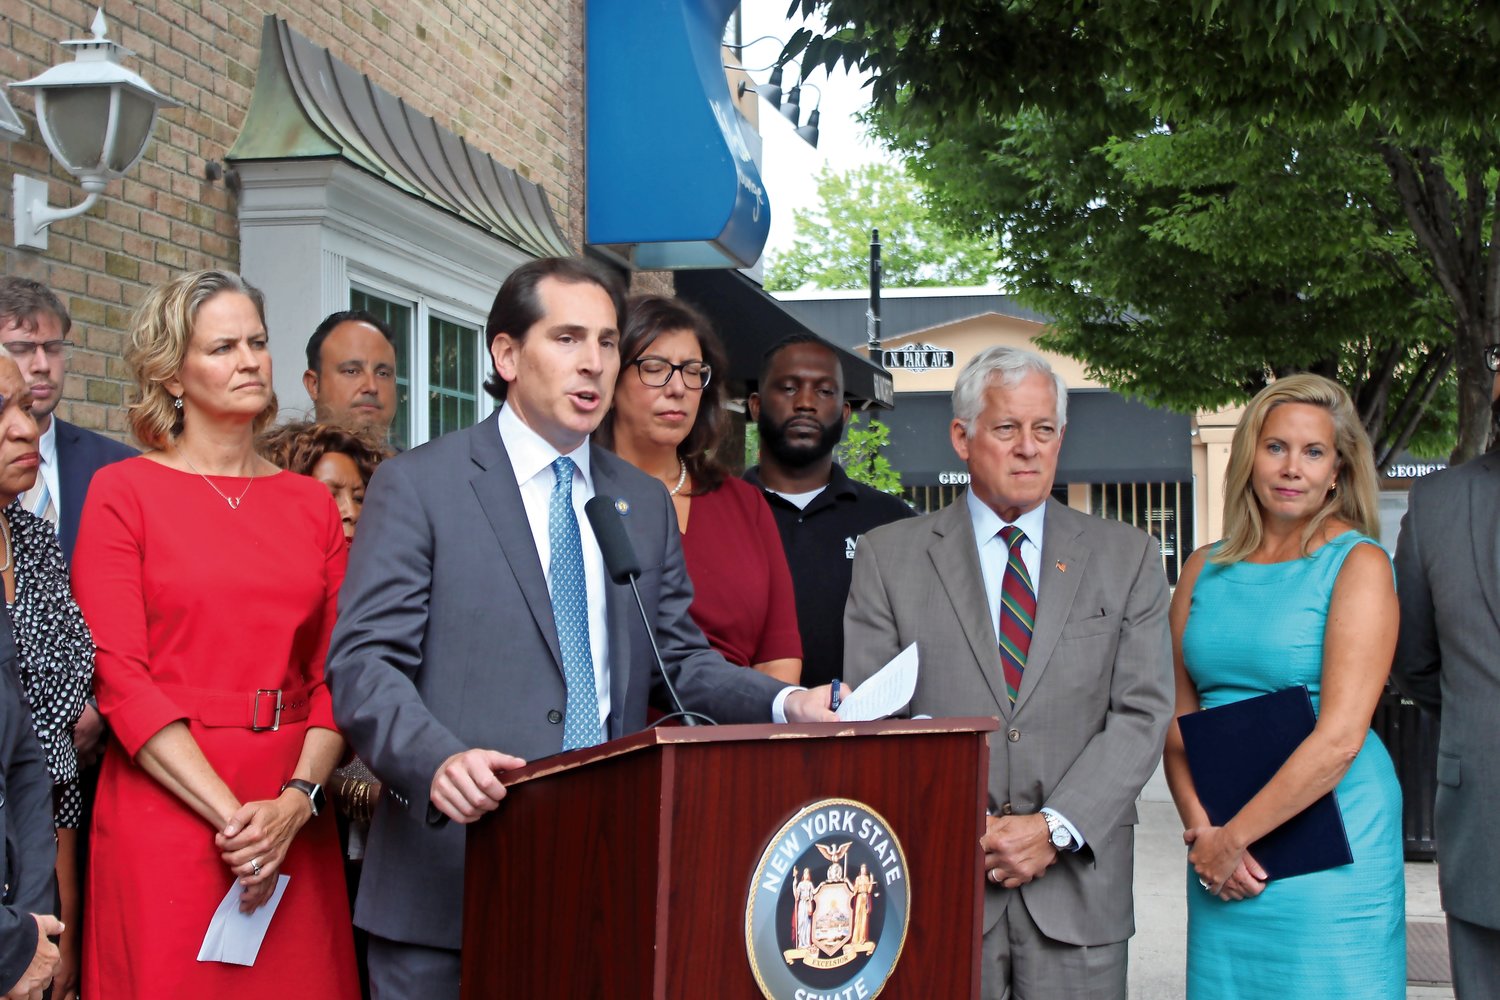 State Sen. Todd Kaminsky, center, and Assemblyman Charles Lavine, right, introduced legislation that would mandate education about the swastika and noose for students in grades six through 12.